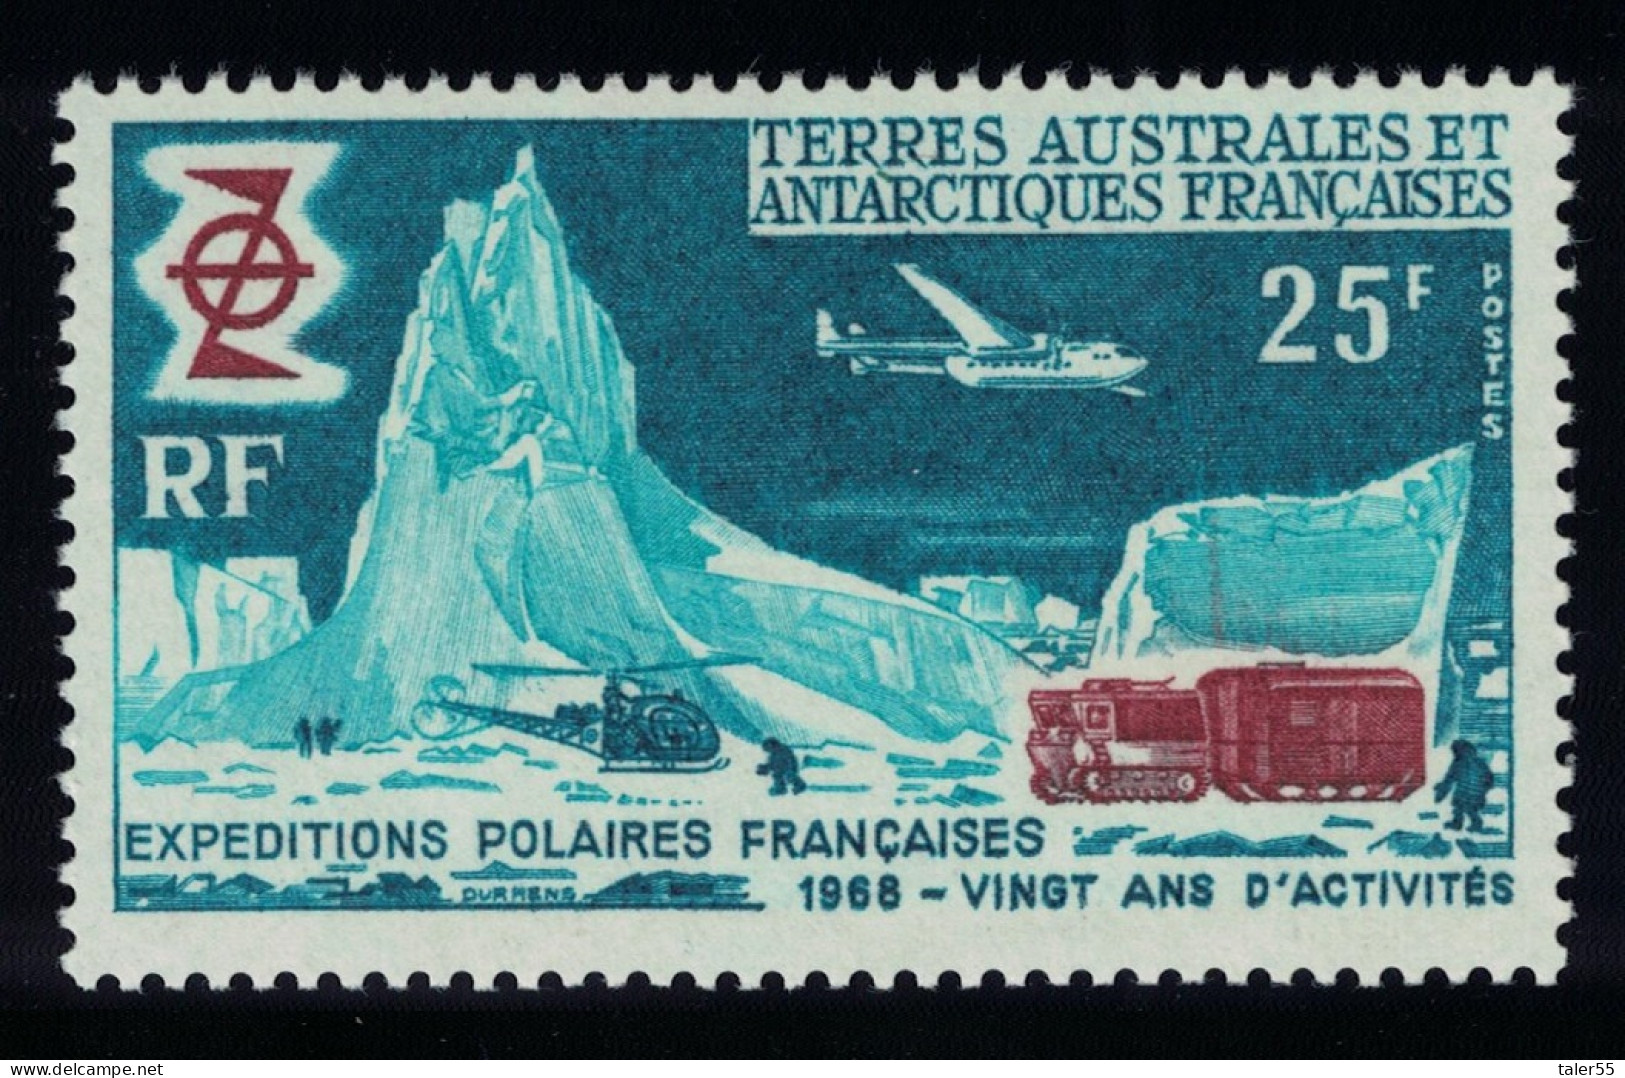 FSAT TAAF Helicopter Airplane Tractor French Polar Exploration 1969 MNH SG#52 MI#50 - Nuevos